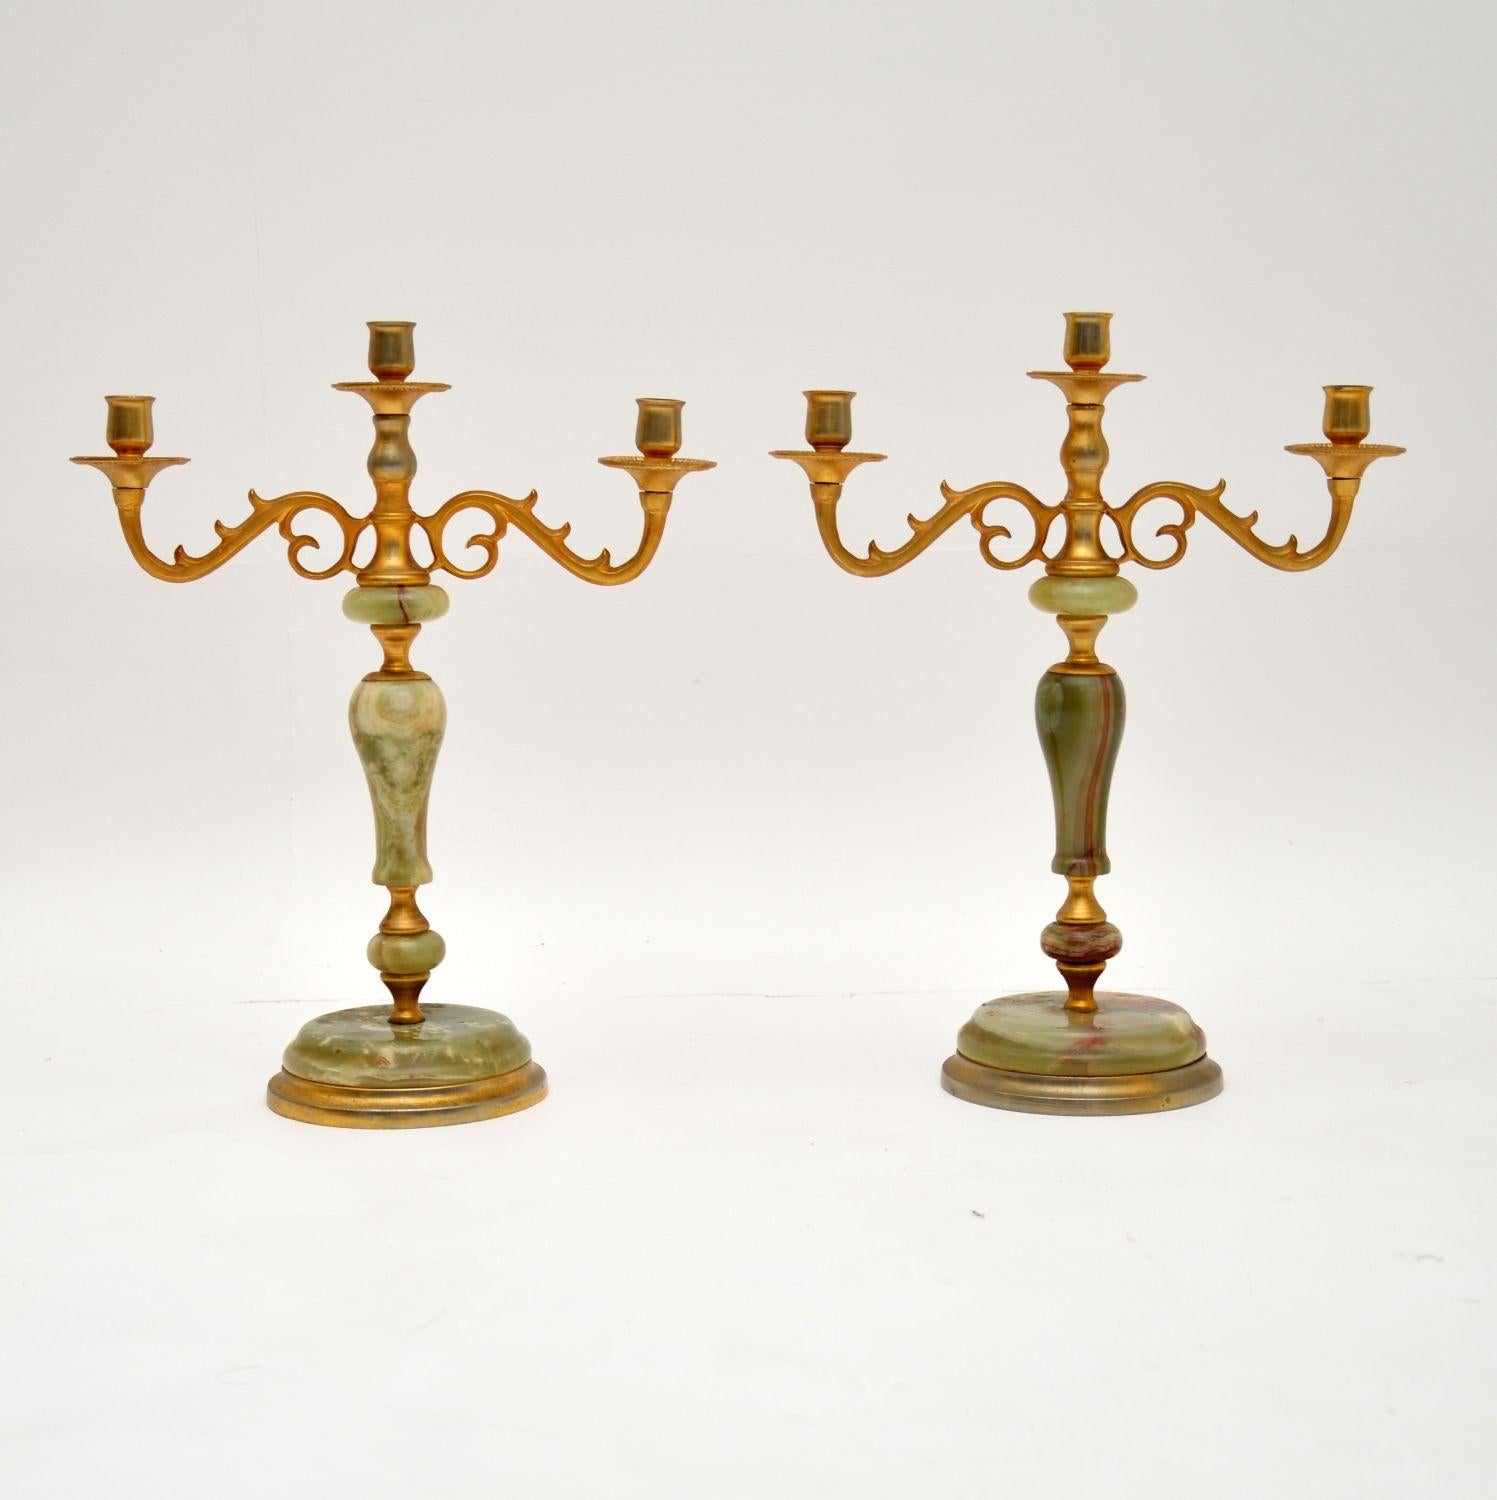 A beautiful pair of antique candelabra, made from onyx and gilt metal & dating from around the 1930-50’s period.
It is unusual to see a pair like this in onyx, they are very well made and have a lovely design.
The condition is excellent for their